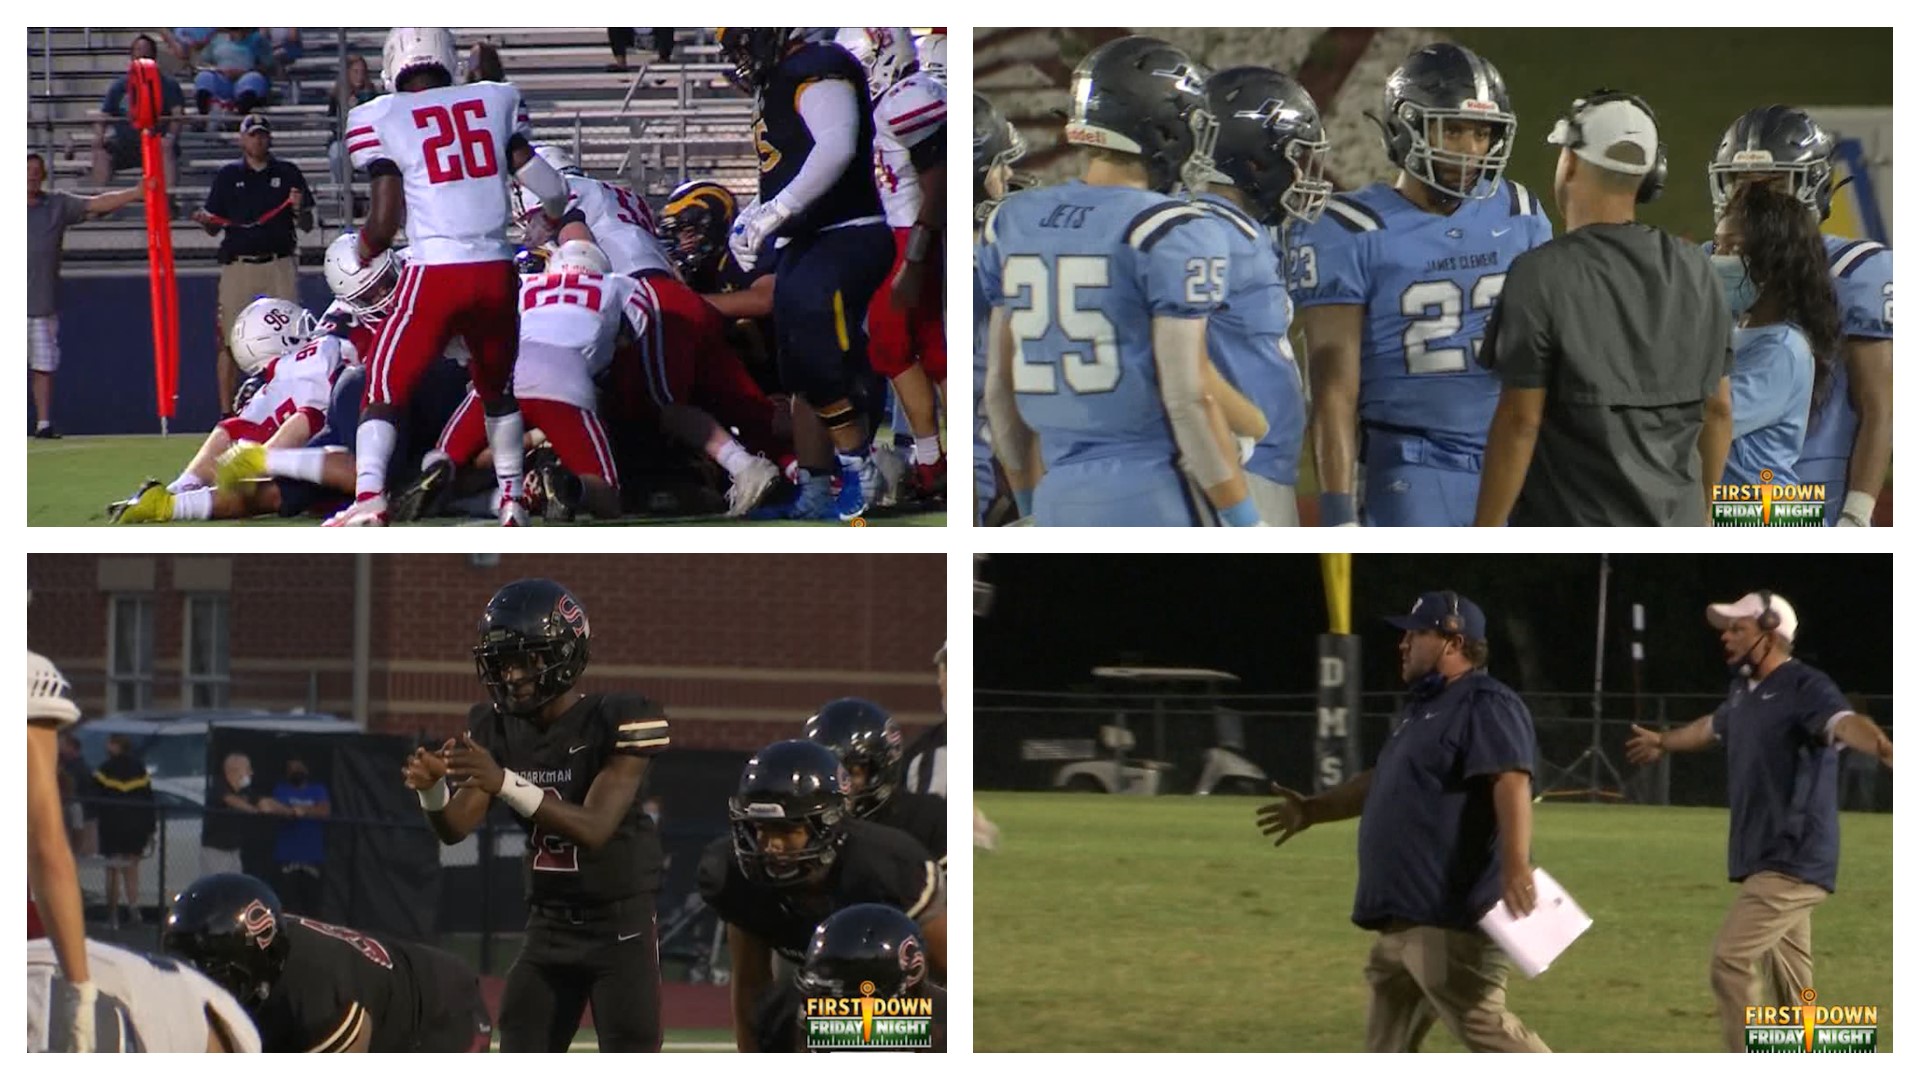 Region play begin for many of our high school football teams across the Tennessee Valley. We've got tons of highlights on the WK 2 edition of First Down Friday Night